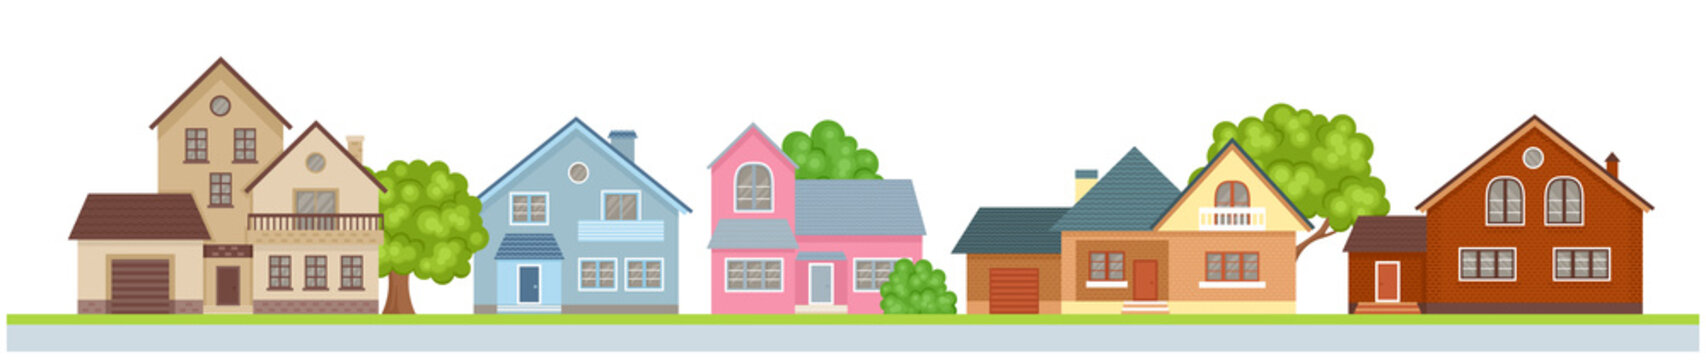 Row of houses on the street. Cute city concept horizontal banner. Vector buildings in simple, flat style.